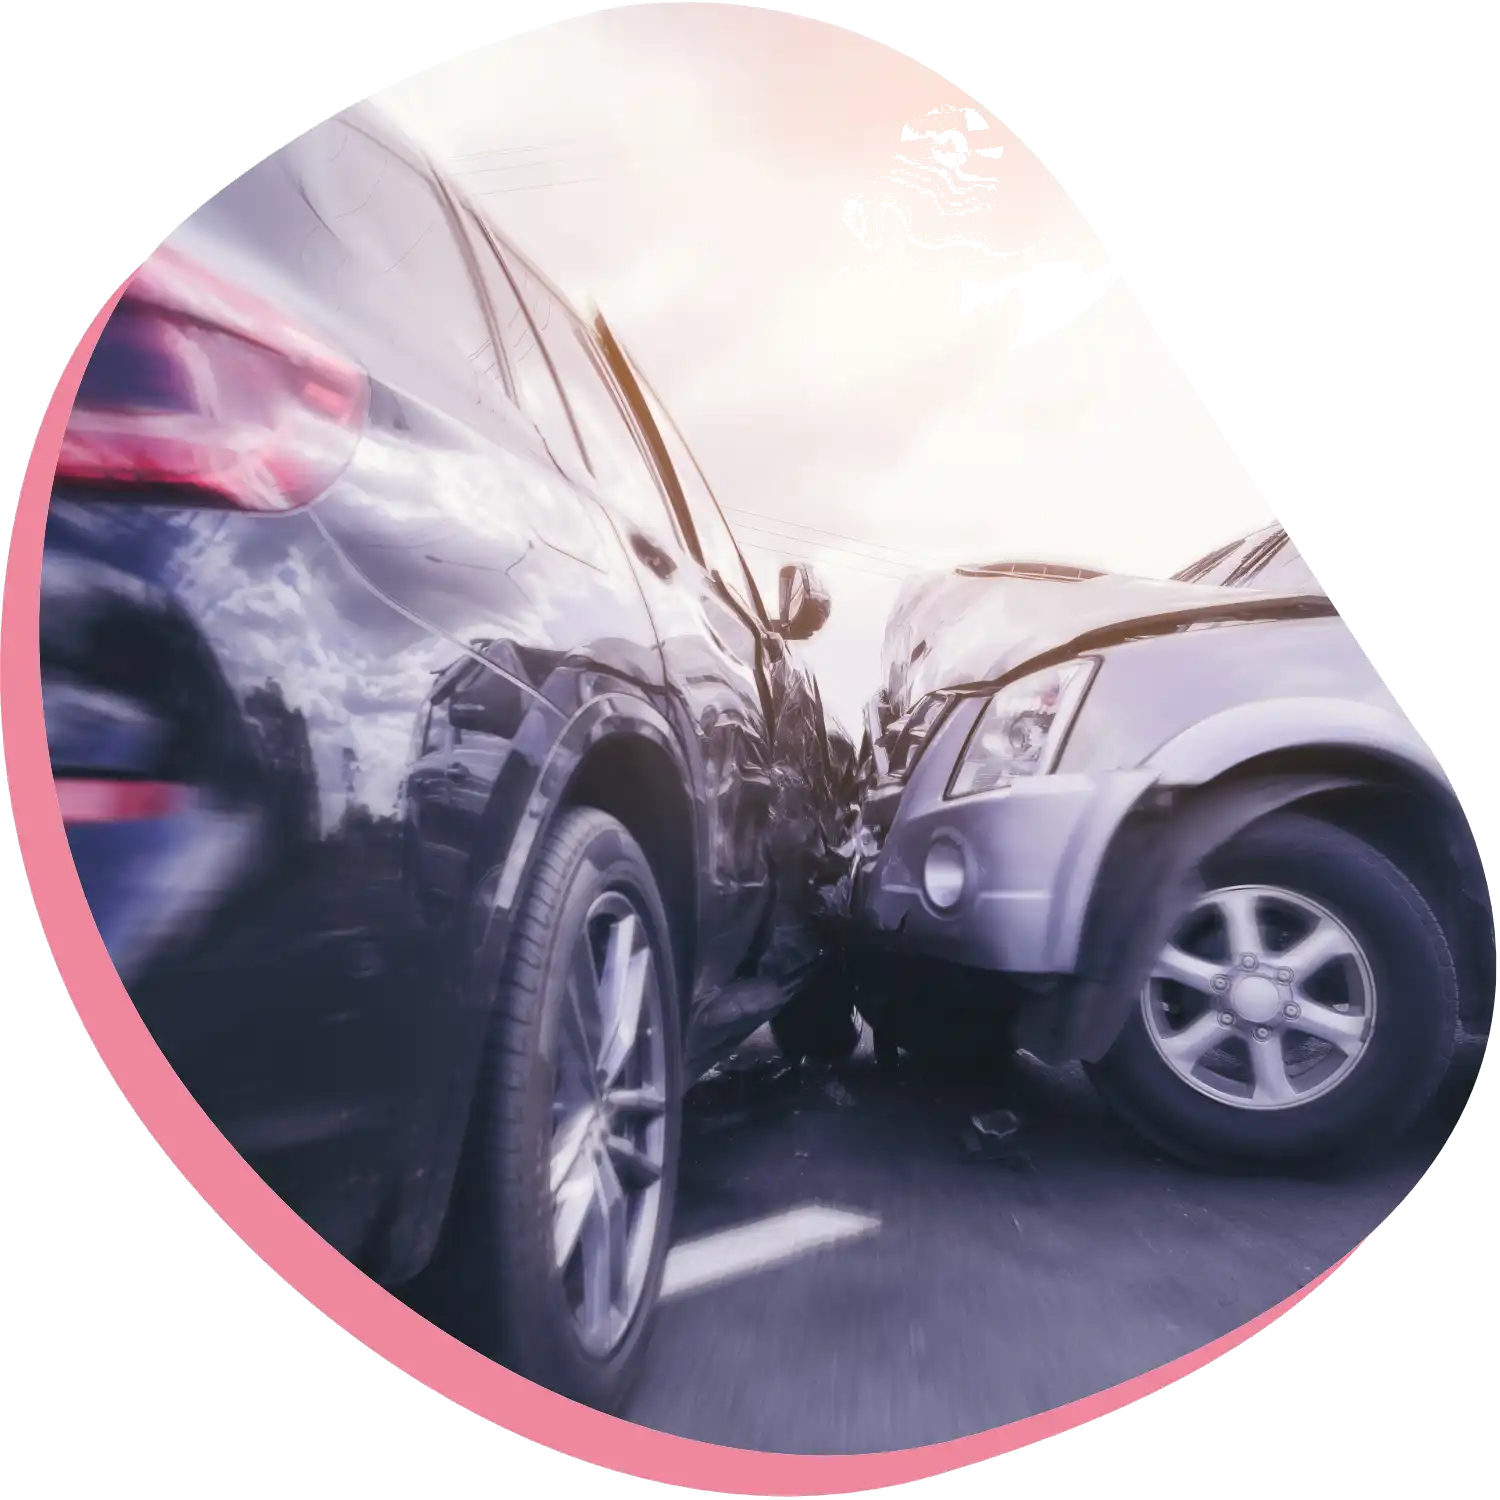 Types of car accidents funde - LawsuitLoans.io funds all kinds of roadway accidents.